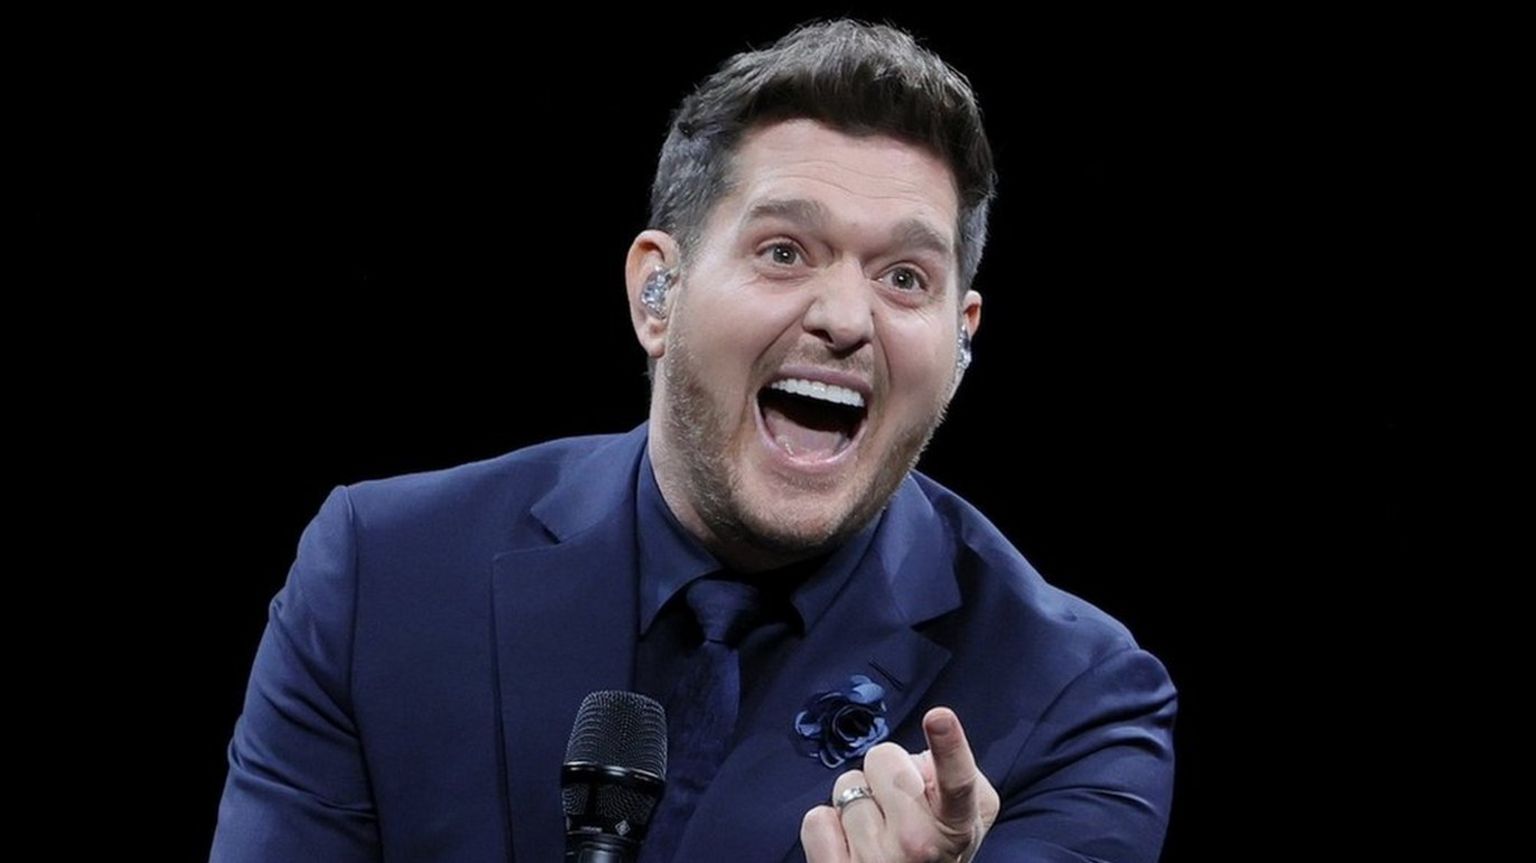 Michael Buble on stage